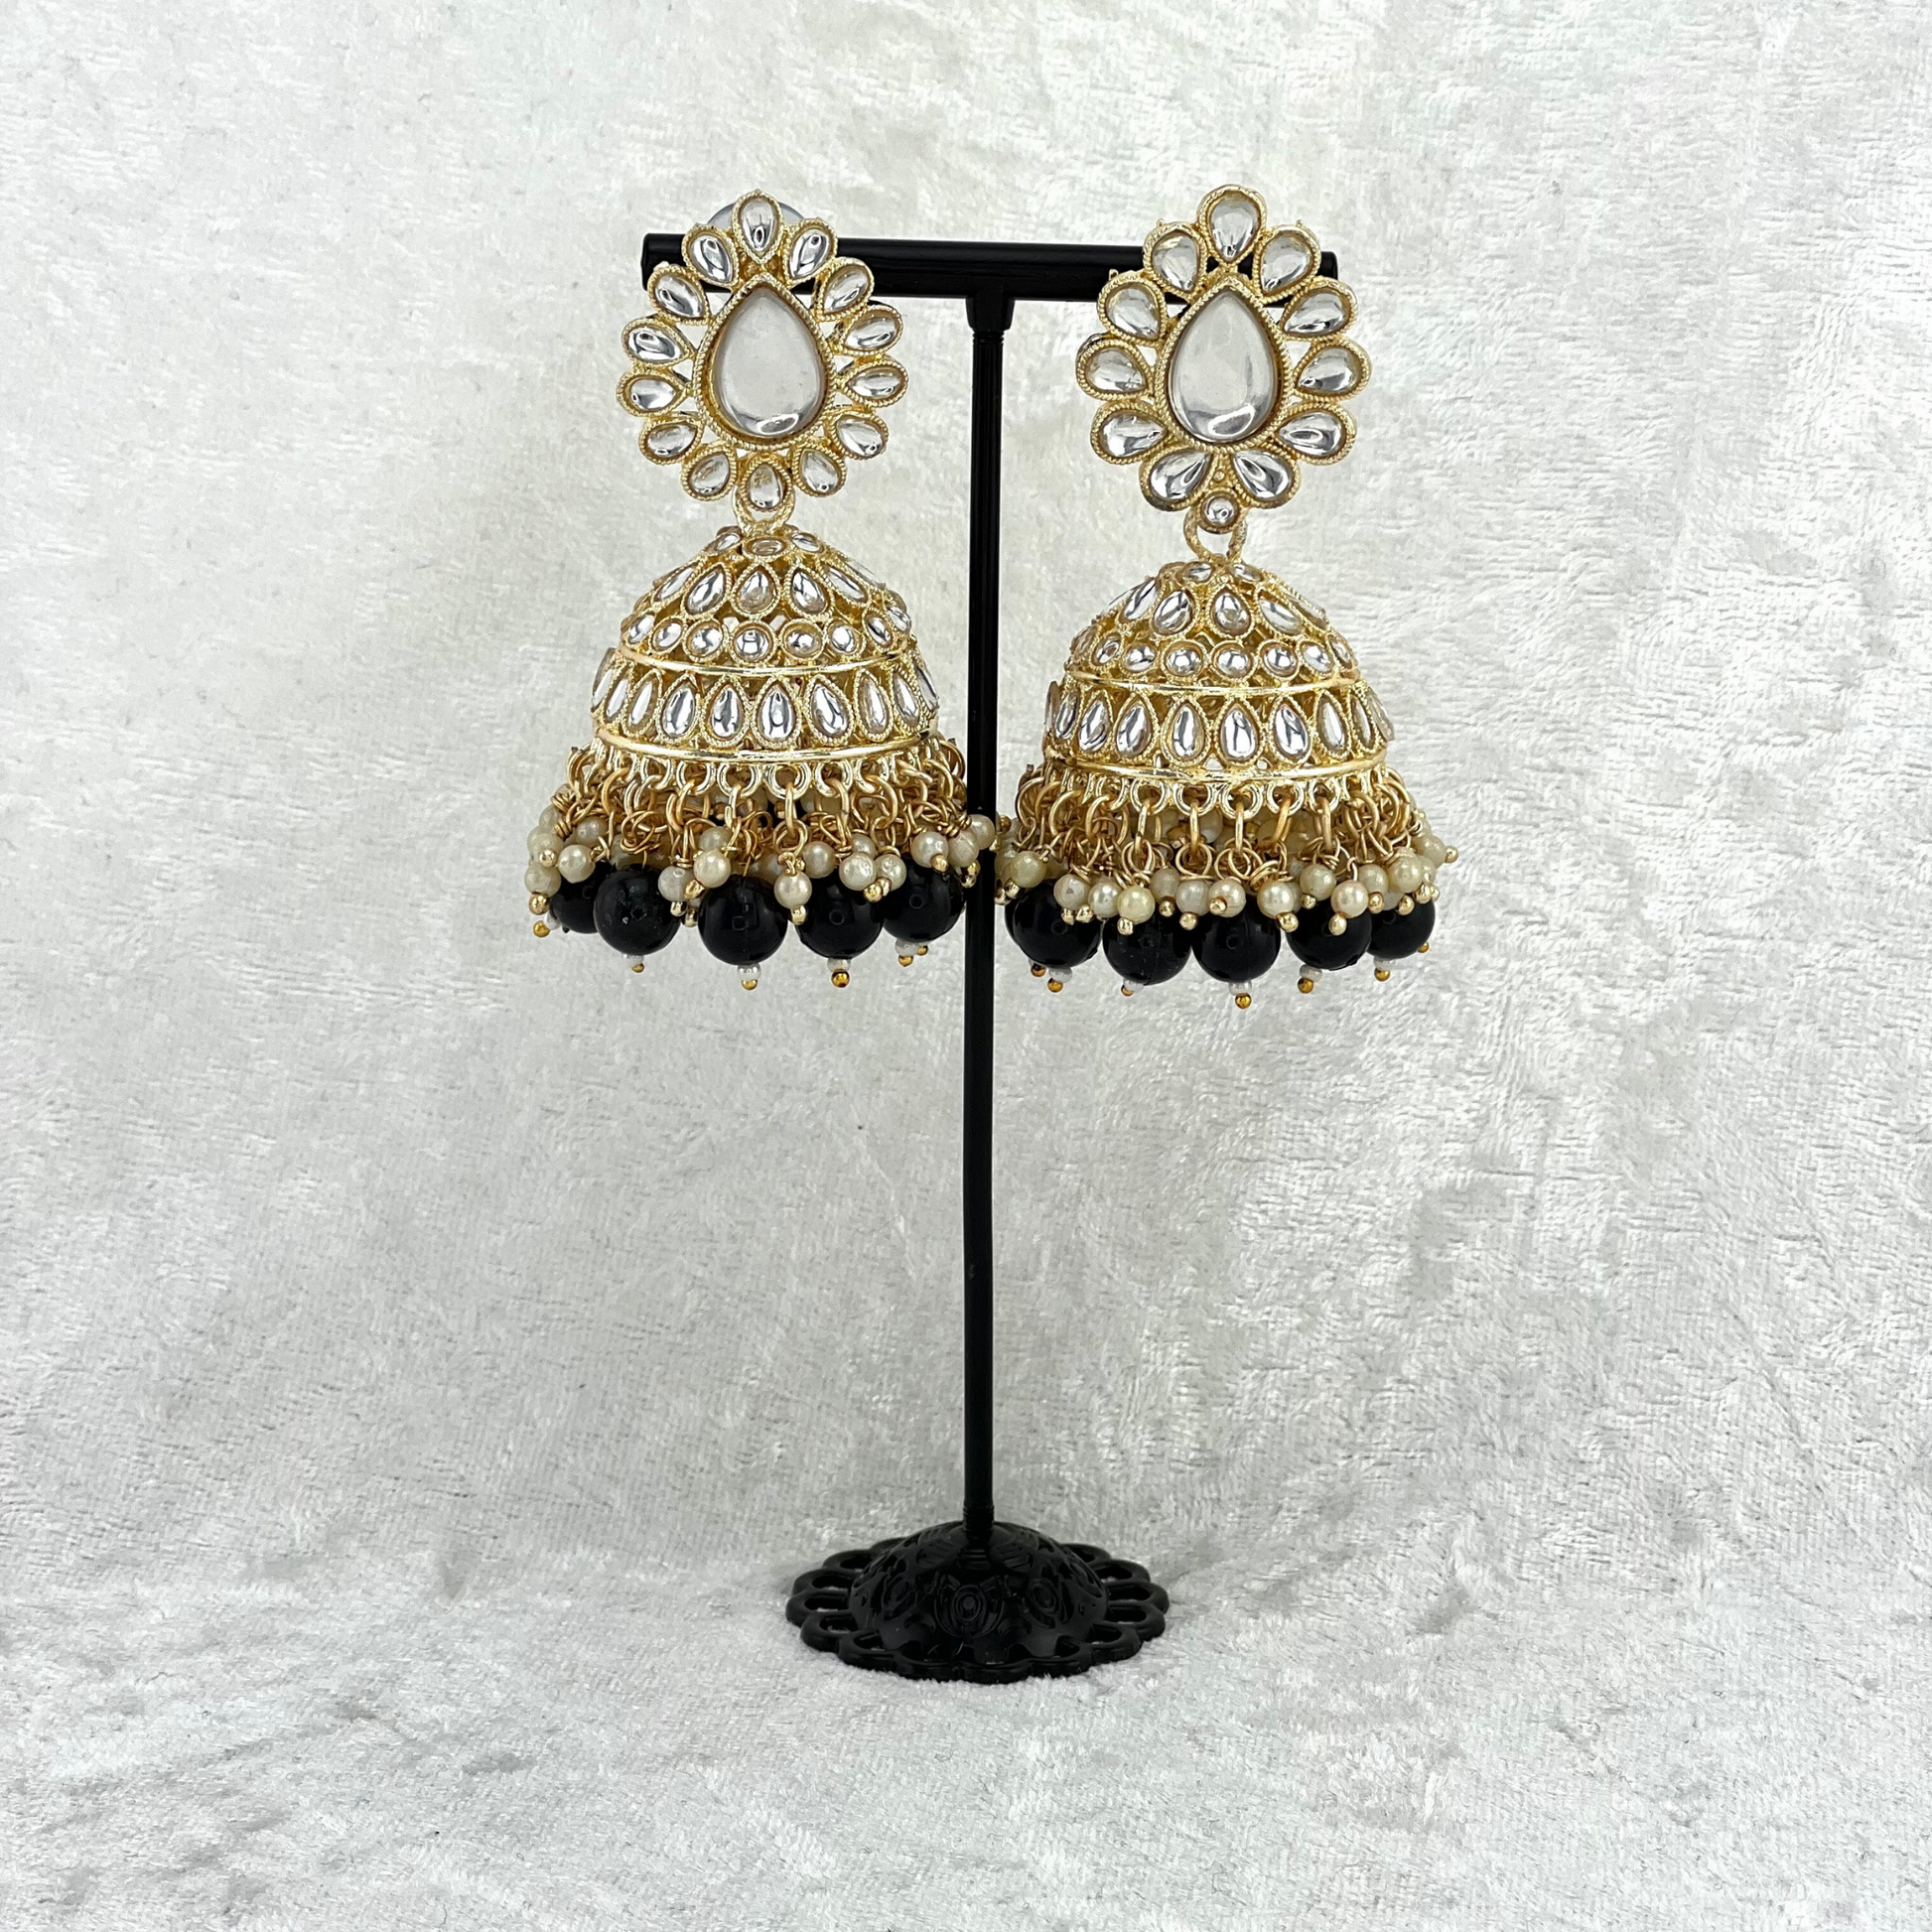 jhumka earrings in black with stones, pearls & beads, indian wedding jewellery prefect for weddings, parties and special occasions. 2022 fashion